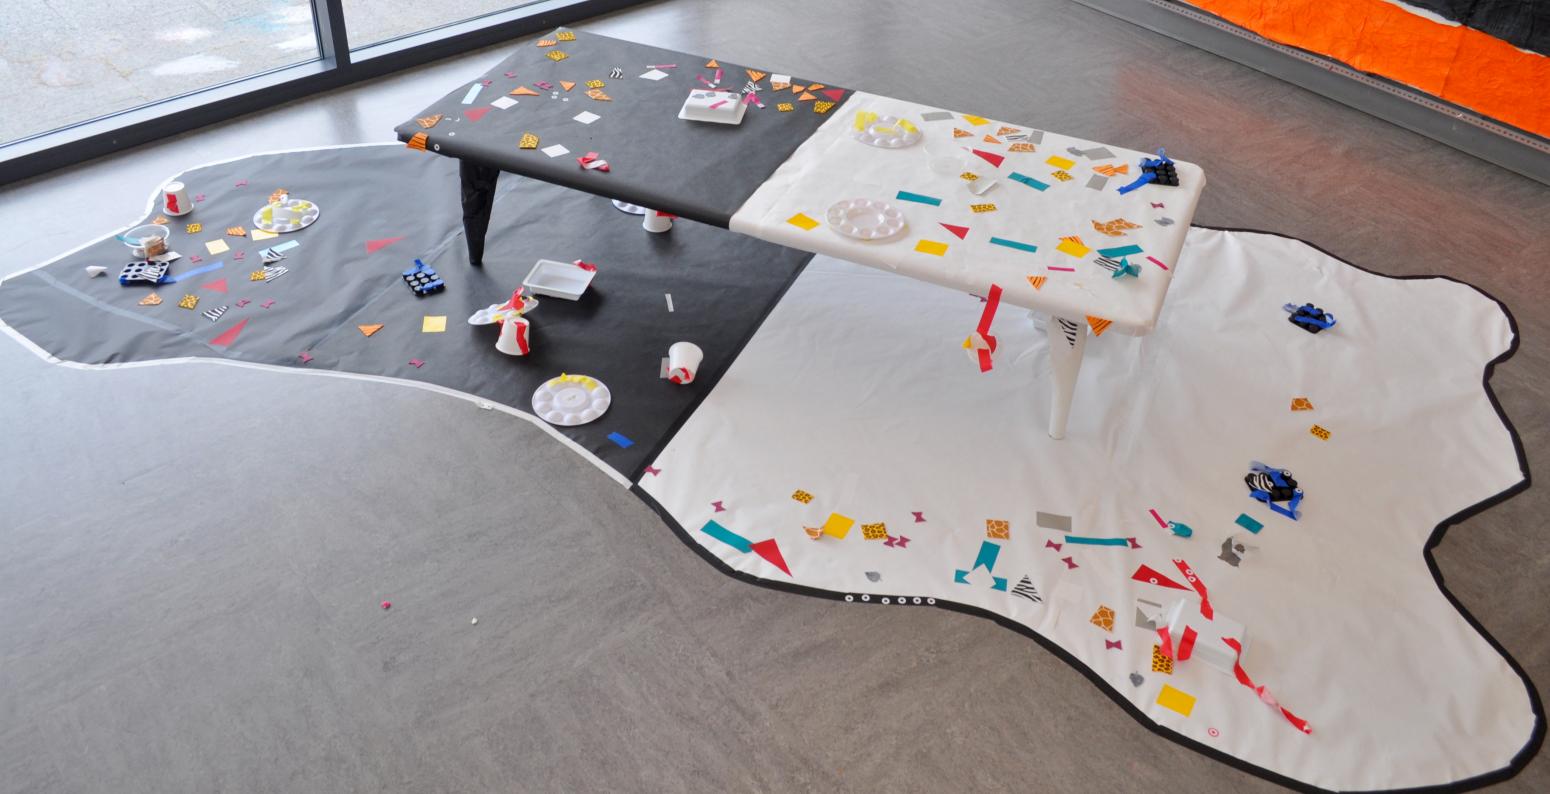 A table and floor covered in black and white paper with colorful stickers on it.